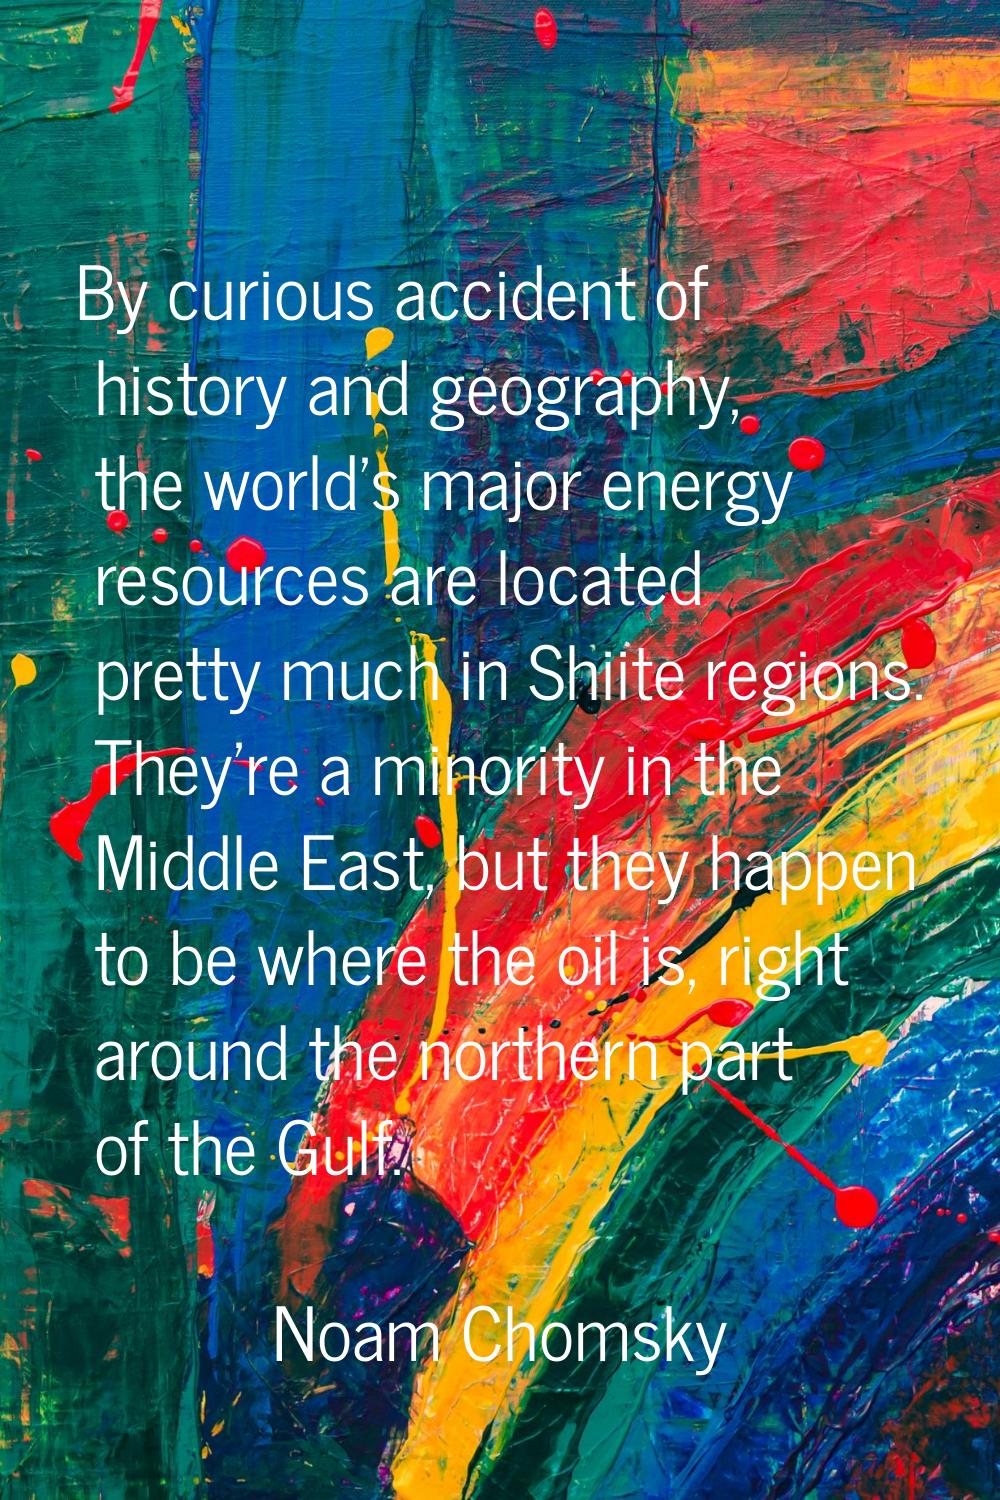 By curious accident of history and geography, the world's major energy resources are located pretty